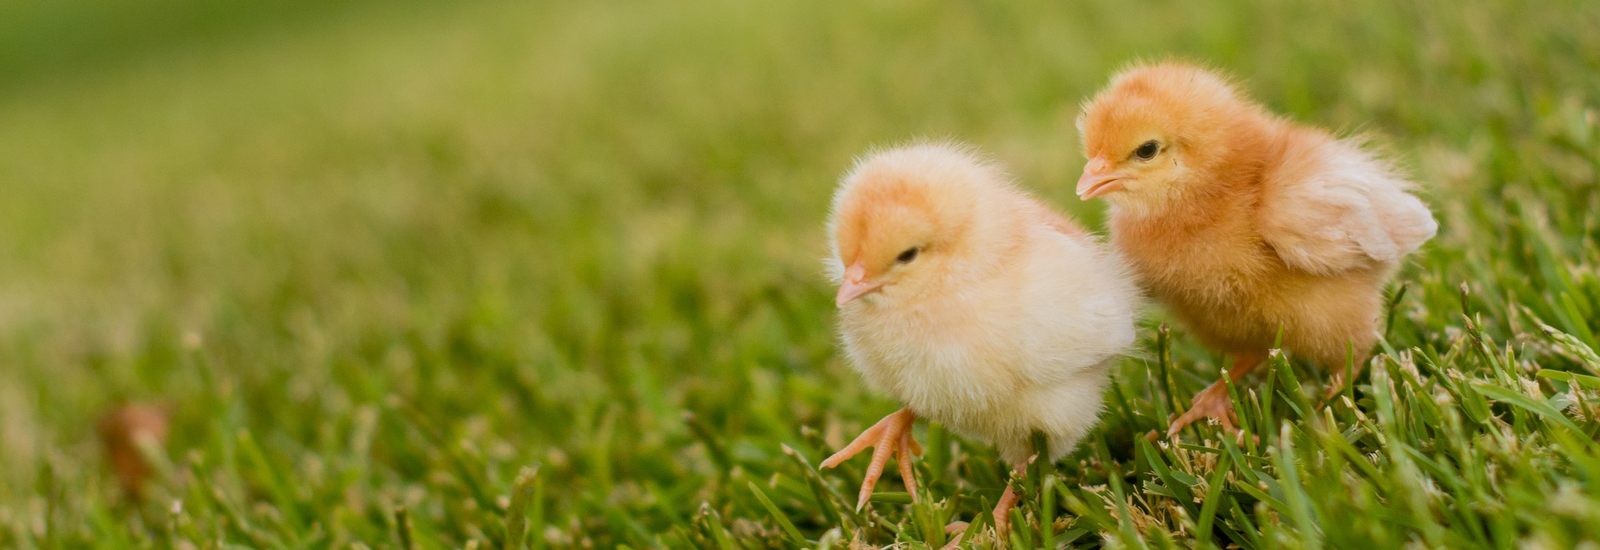 Two yellow baby chickens walking in grass.